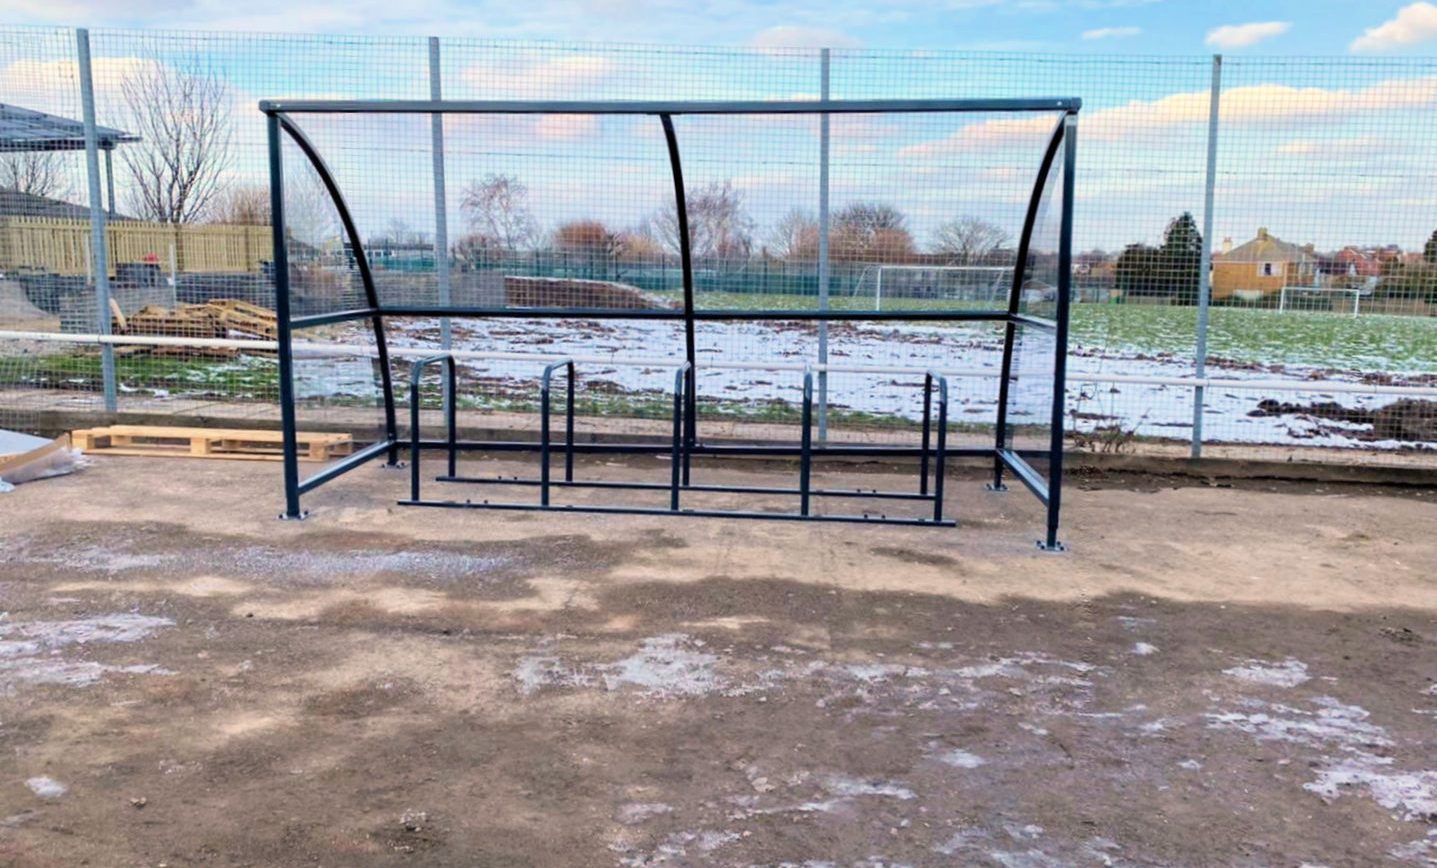 The Beacon School – Cycle Shelter